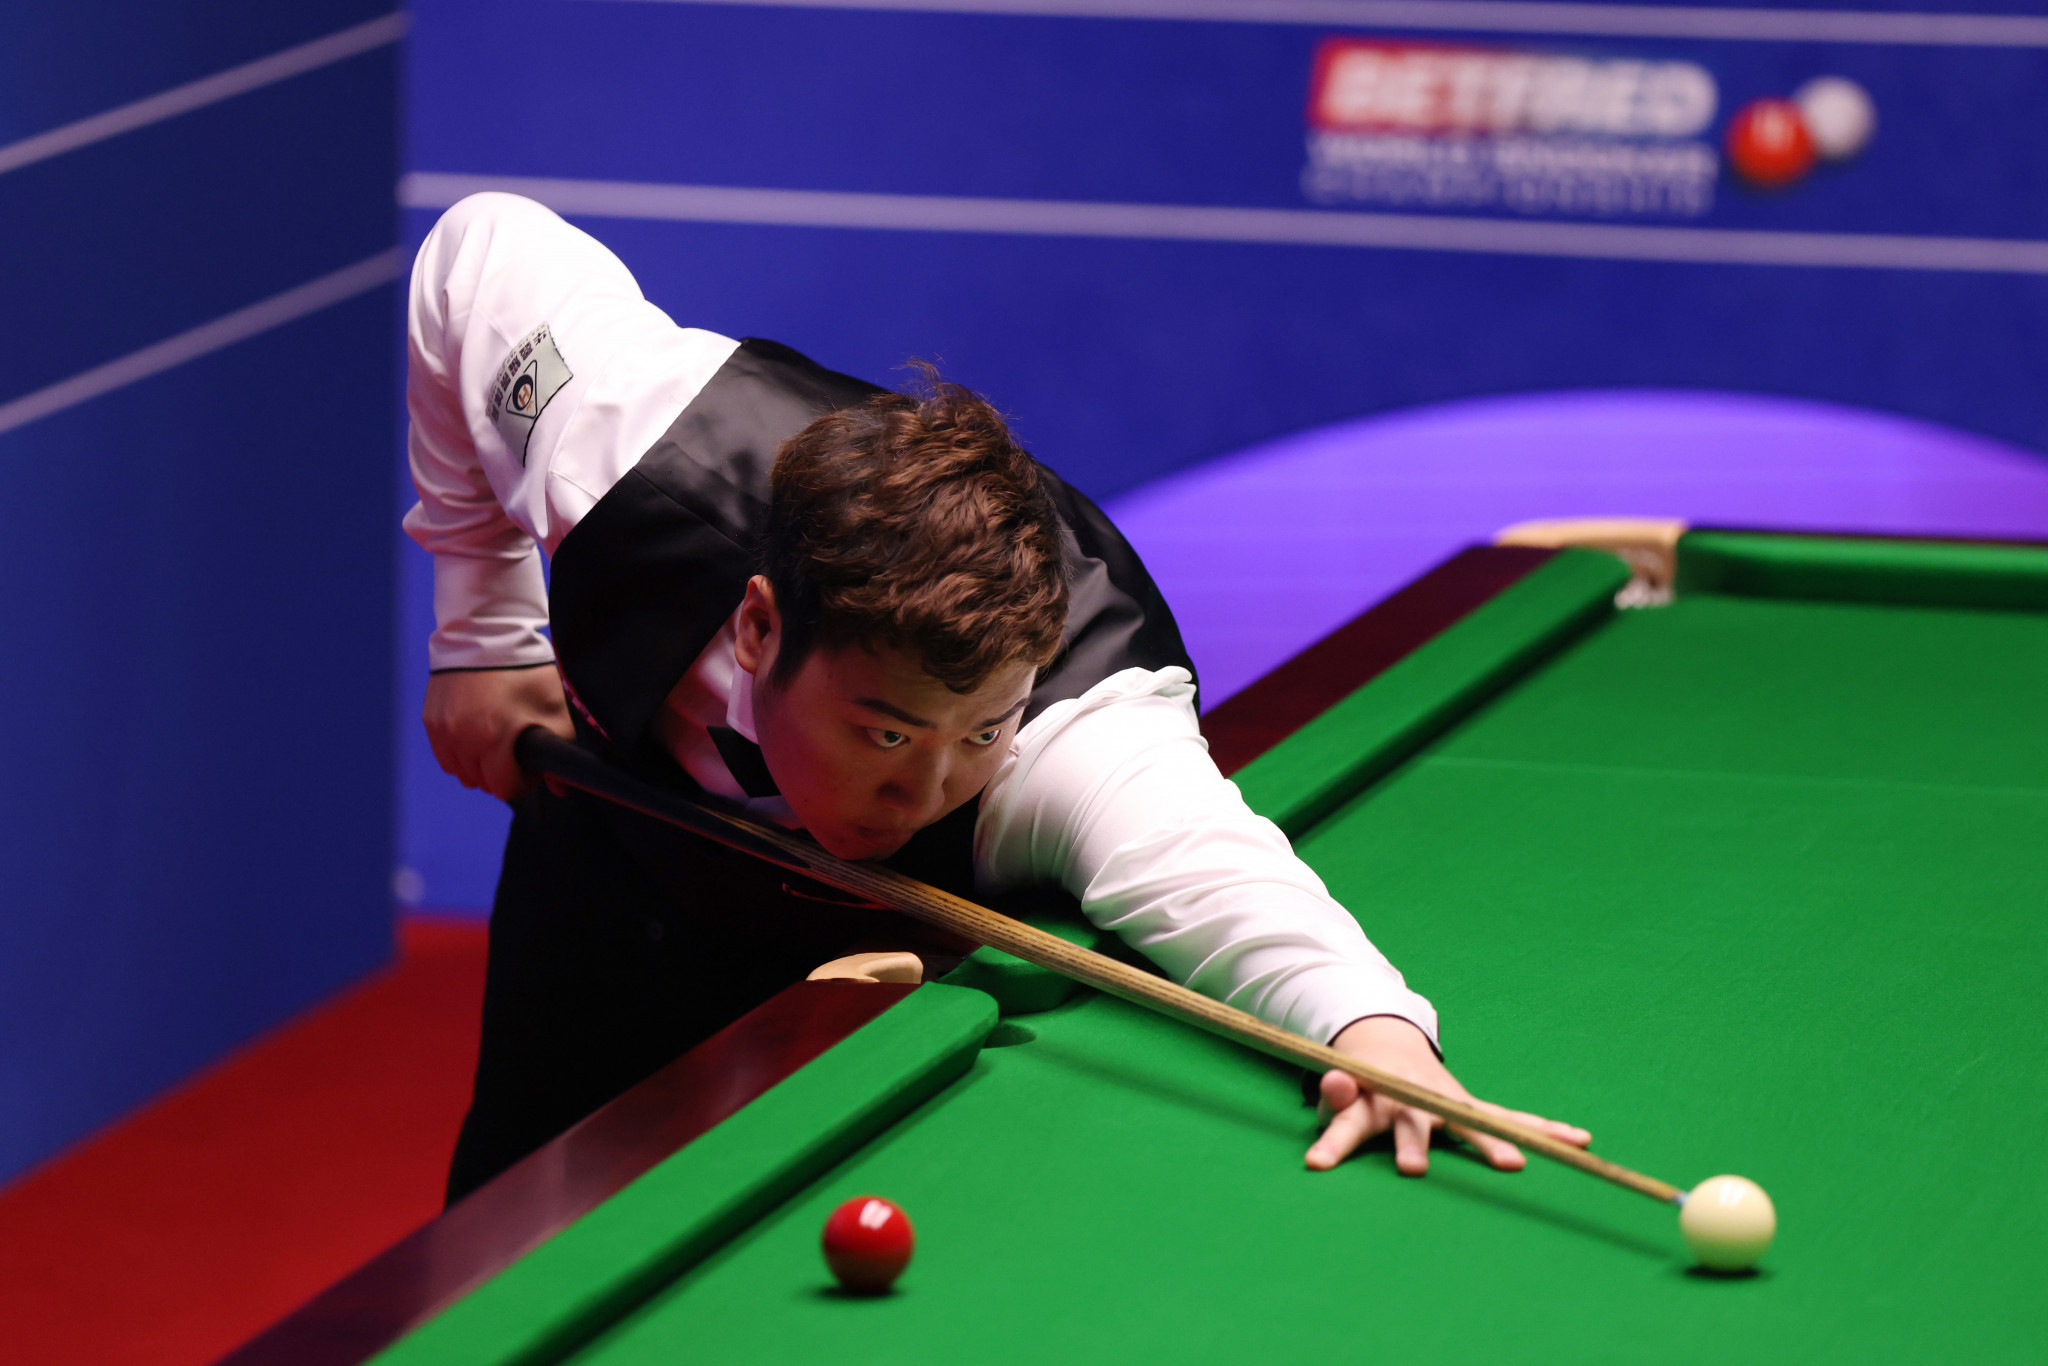 Yan Bingtao produced an impressive second session to level his World Snooker Championship quarter-final against Mark Williams ©Getty Images